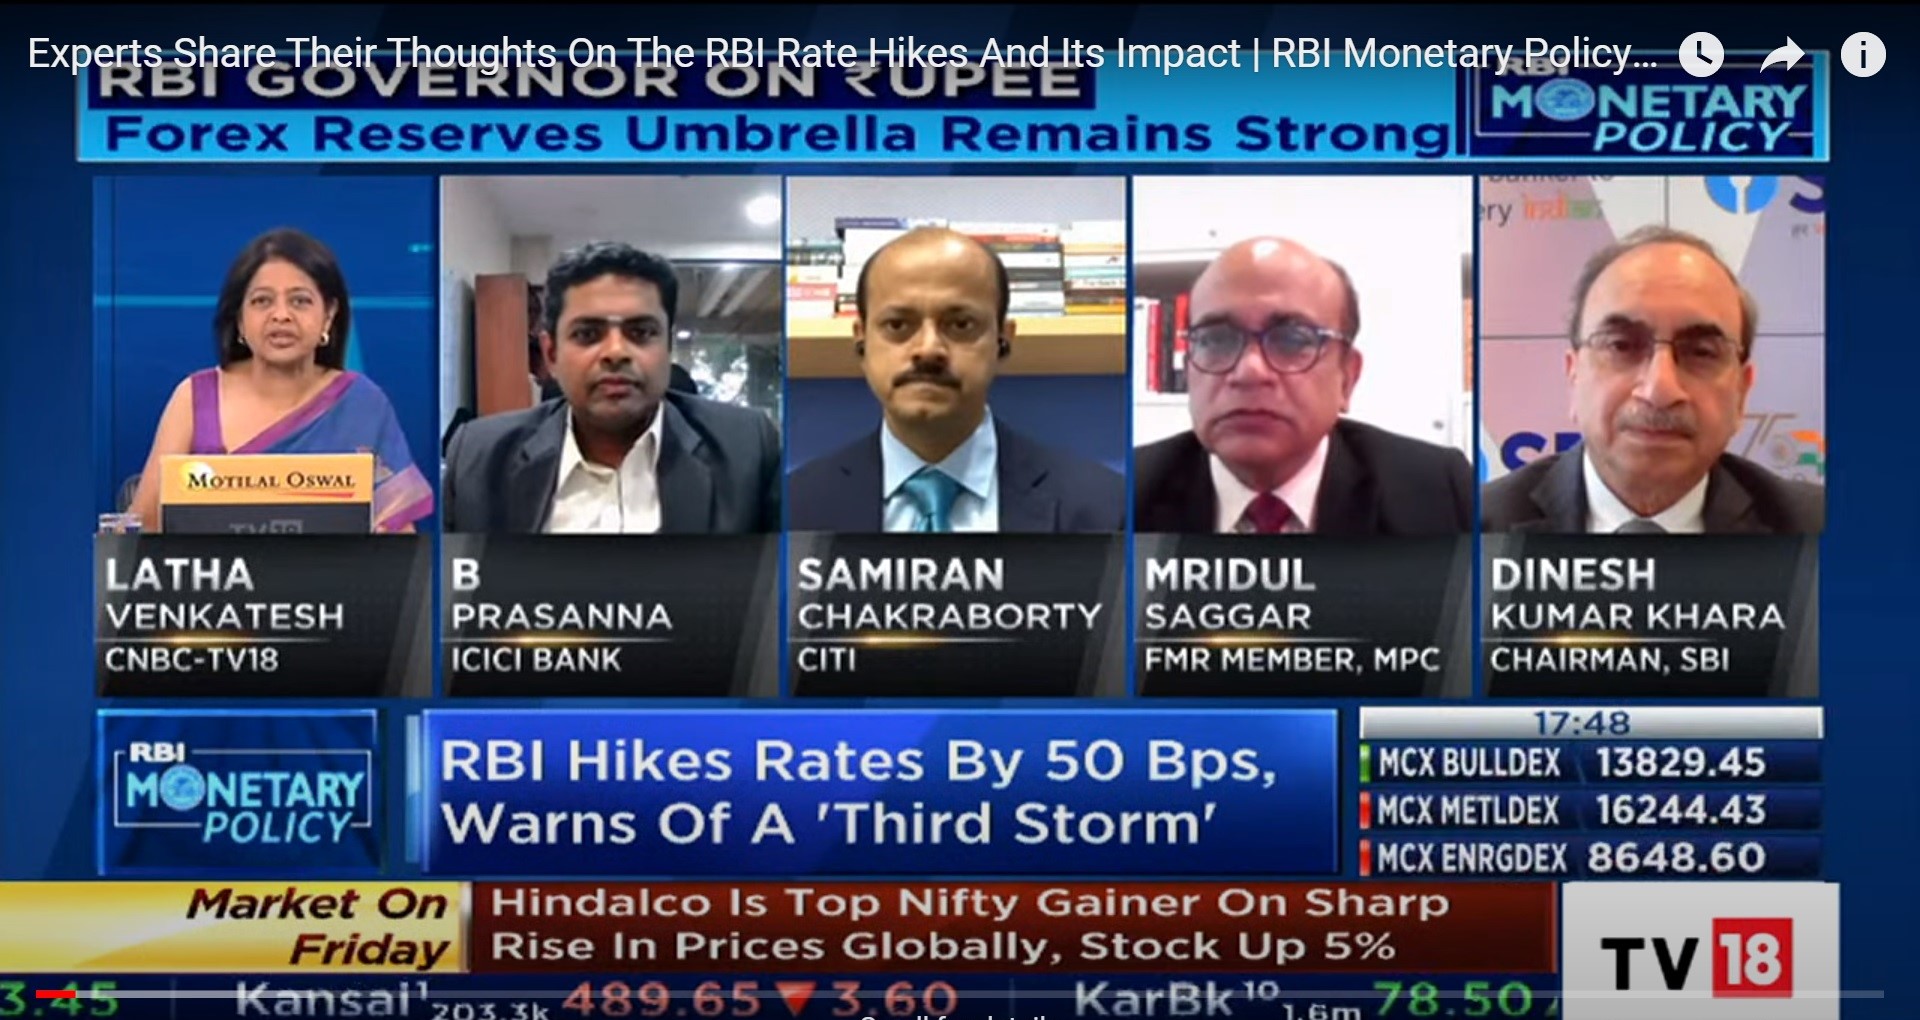 RBI’s Monetary Policy Announcement in the CNBC Indianomics program